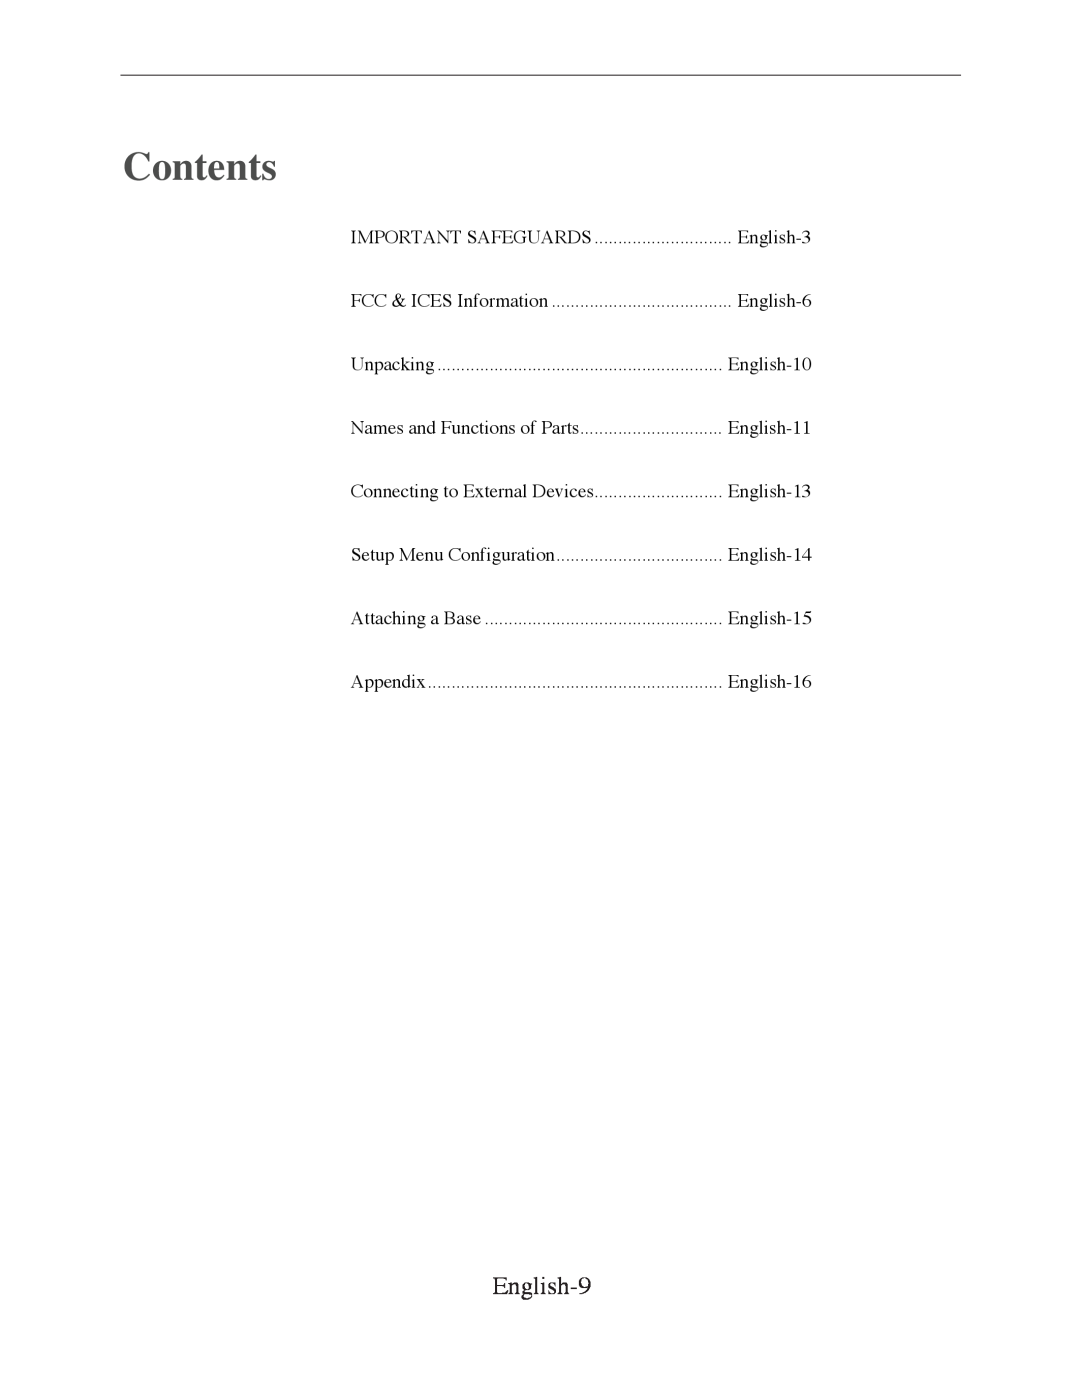 Samsung SMT-170P manual Contents, English-9, FCC & ICES Information, Names and Functions of Parts, Setup Menu Configuration 